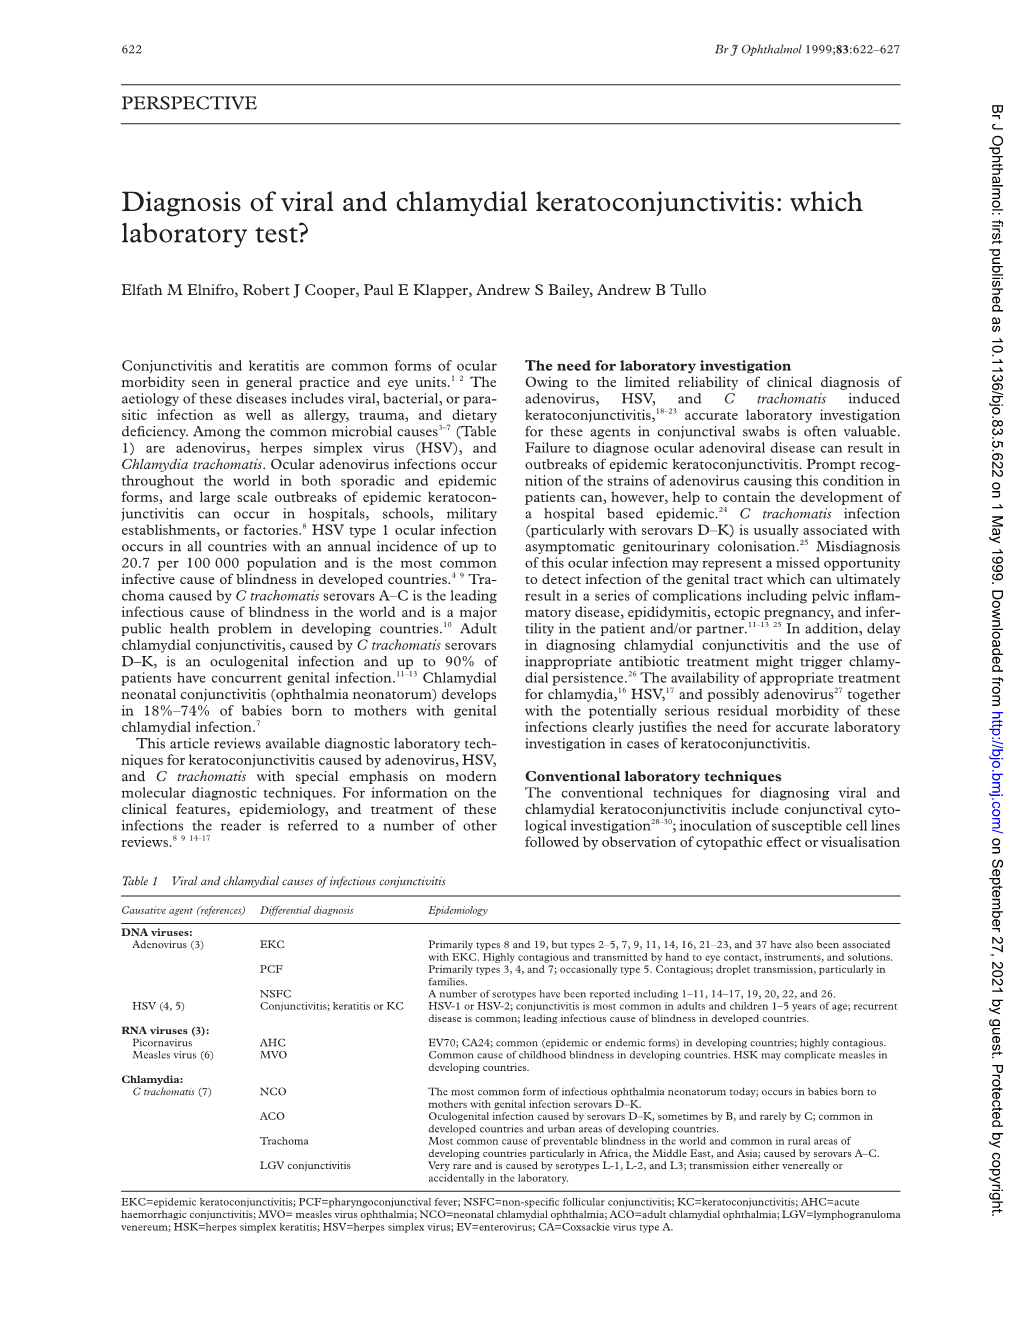 Diagnosis of Viral and Chlamydial Keratoconjunctivitis: Which Laboratory Test?